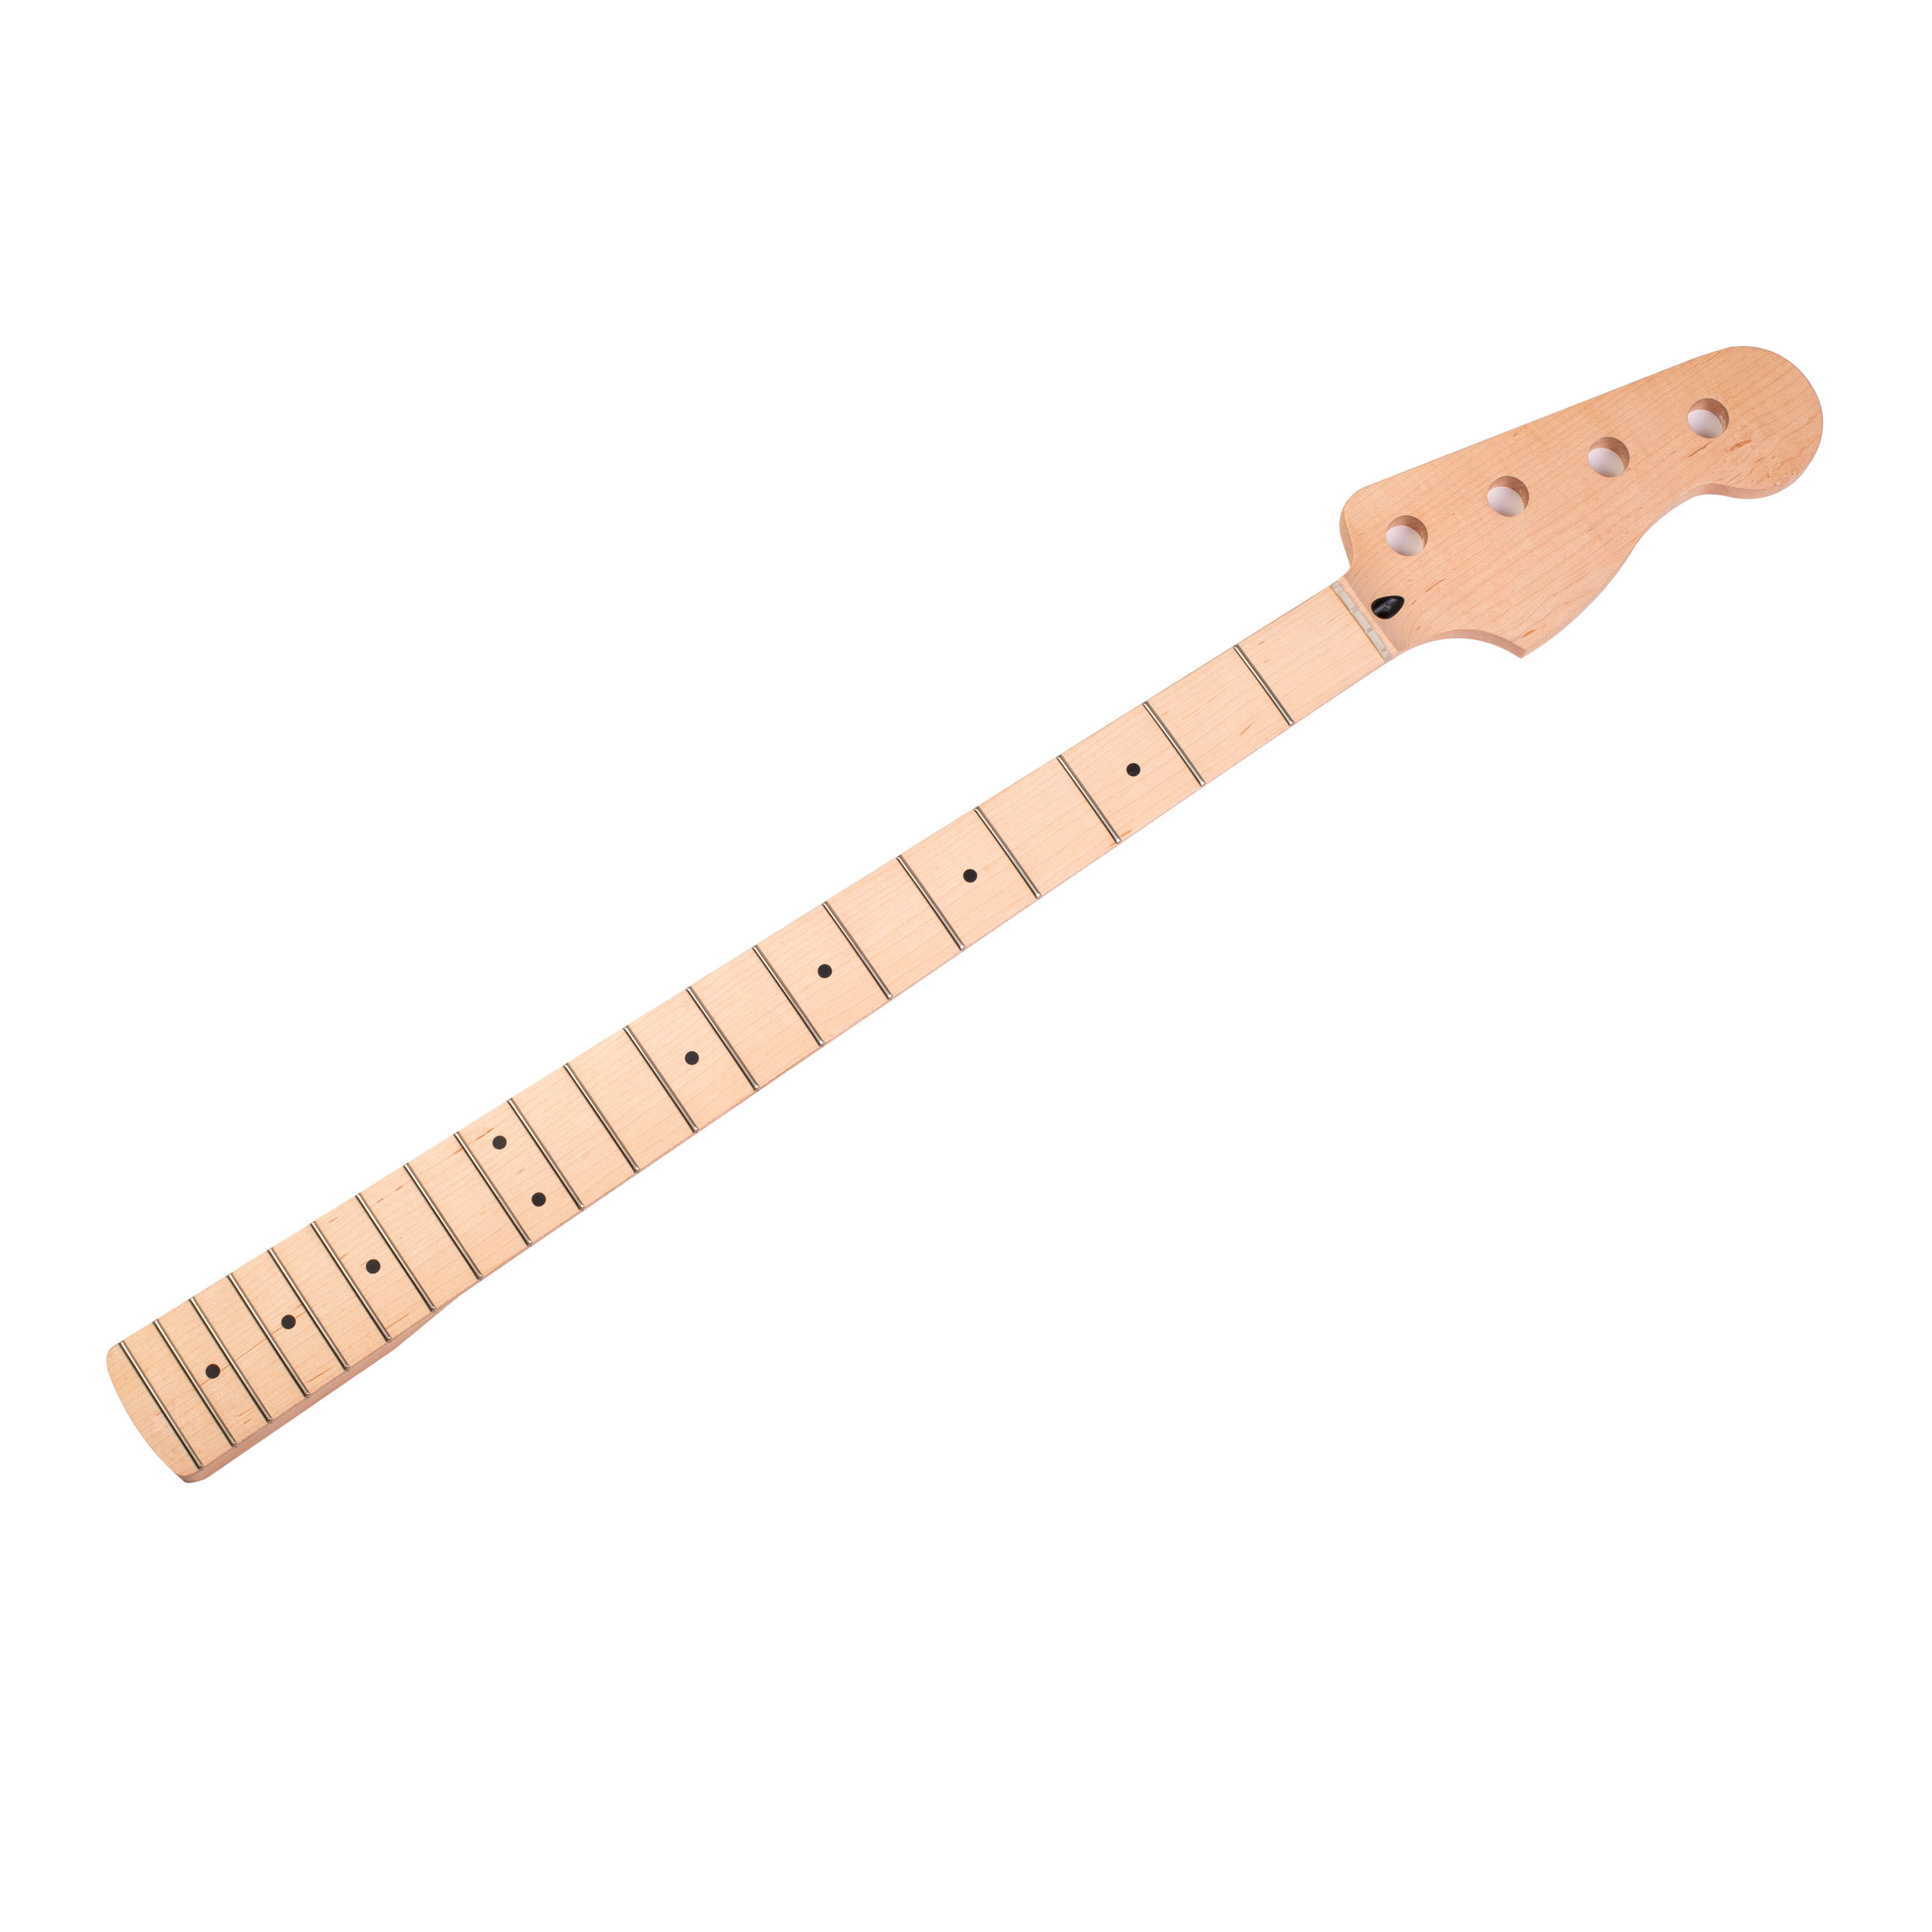 Mighty Mite Neck for Fender Bass, Indian Rosewood fingerboard